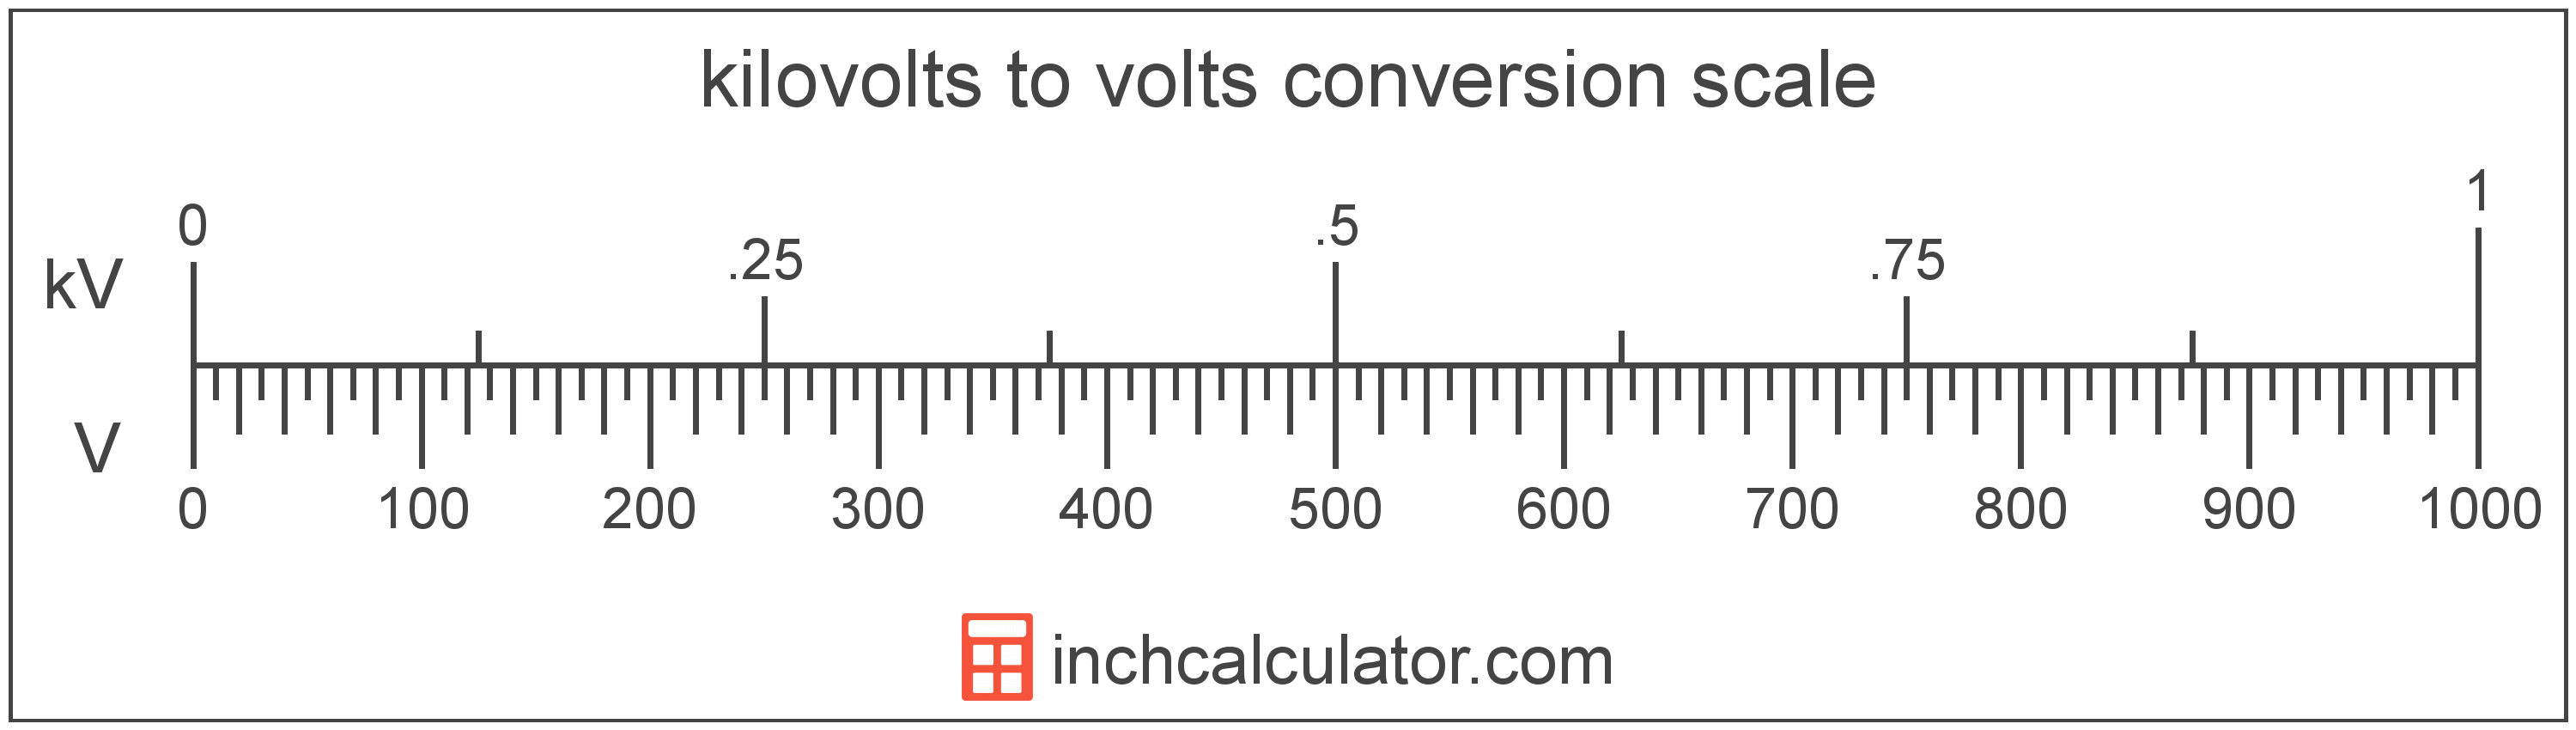 conversion scale showing kilovolts and equivalent volts voltage values